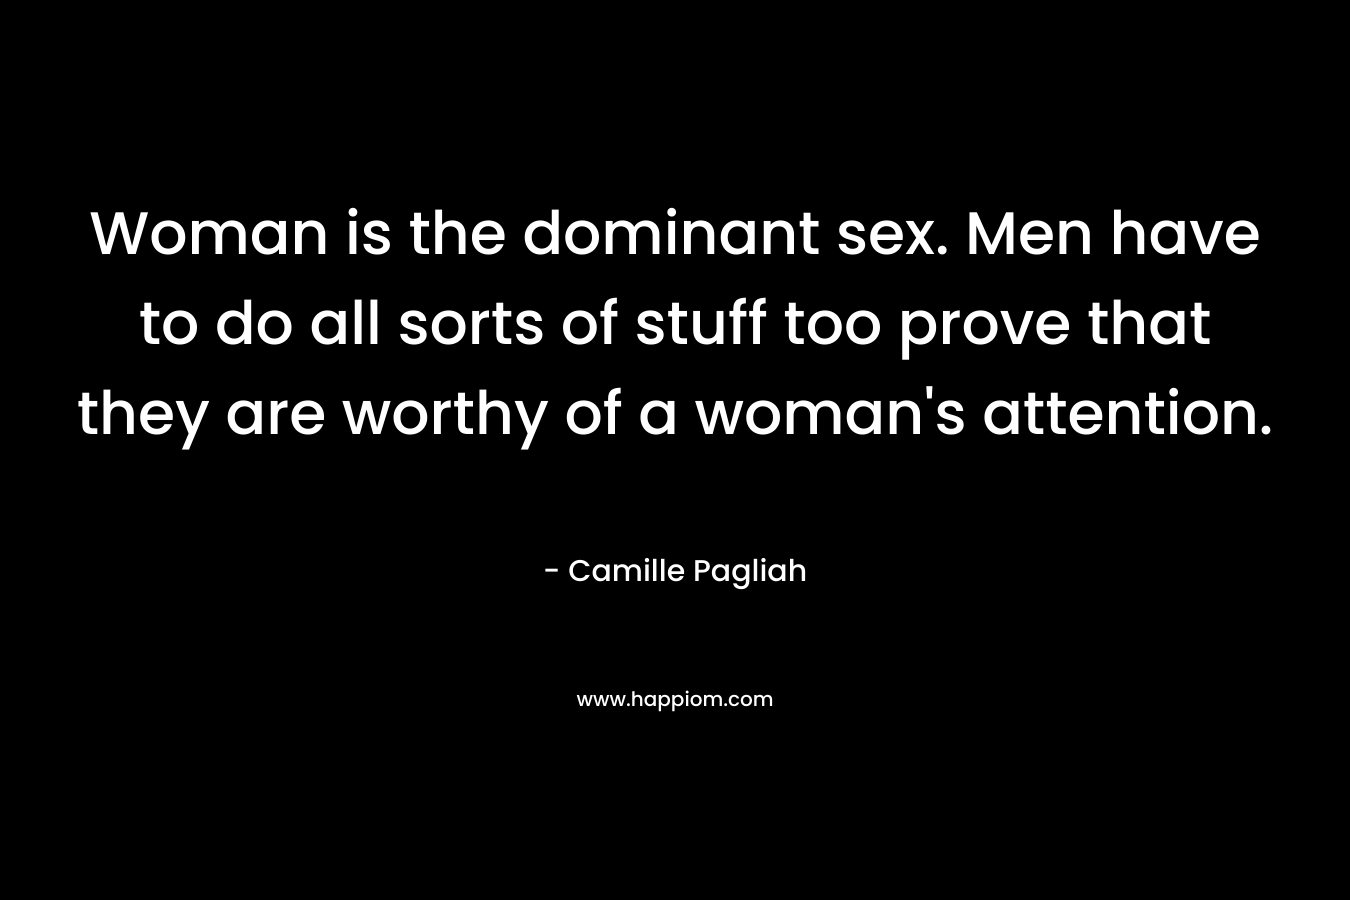 Woman is the dominant sex. Men have to do all sorts of stuff too prove that they are worthy of a woman's attention.